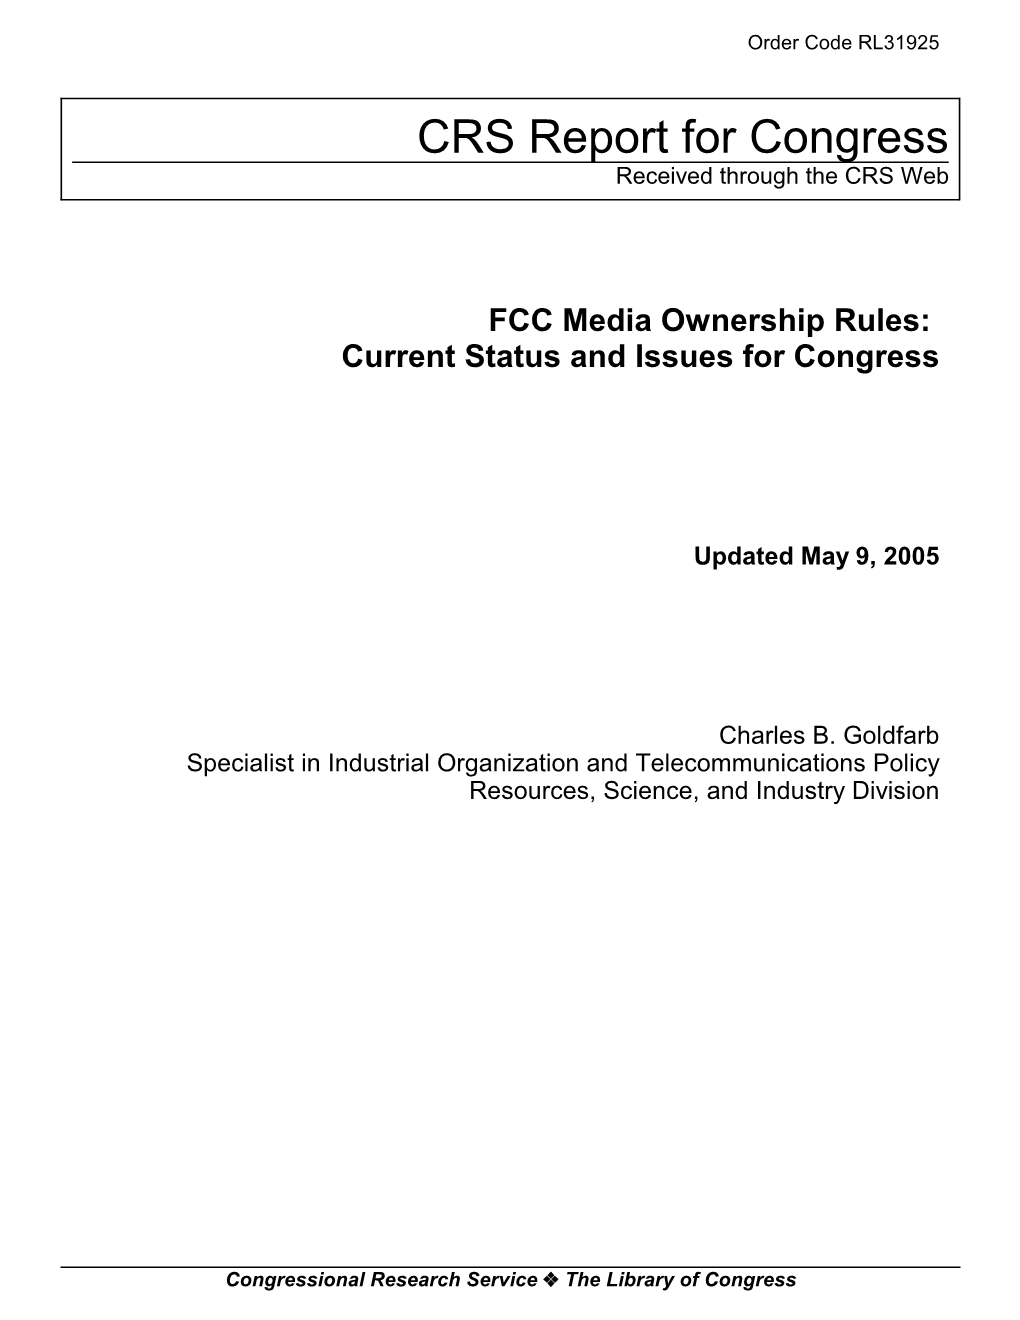 FCC Media Ownership Rules: Current Status and Issues for Congress